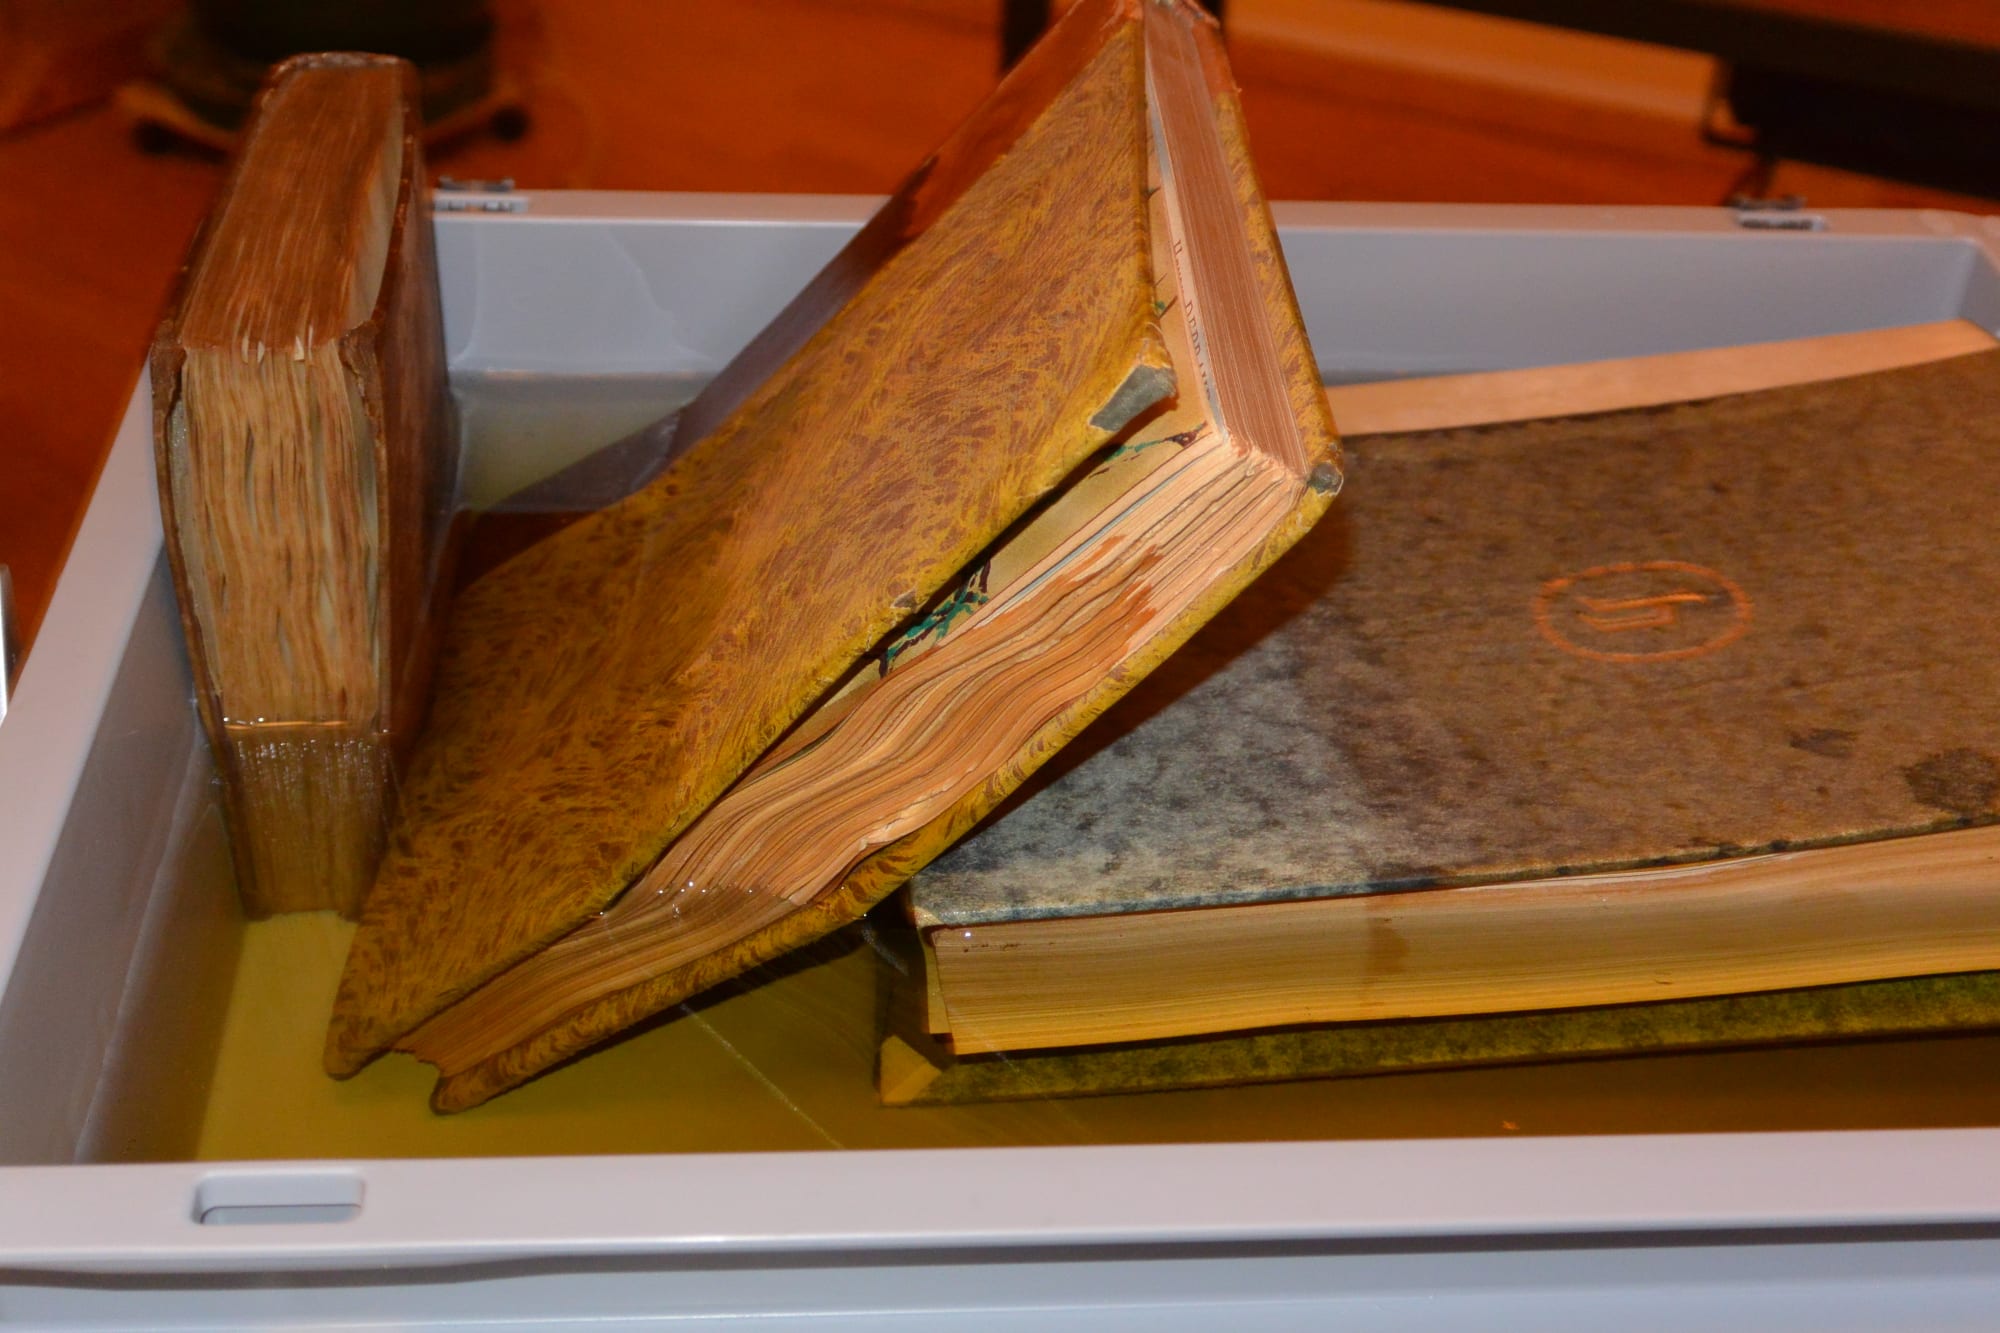 Books with half leather bindings in a bain-marie.